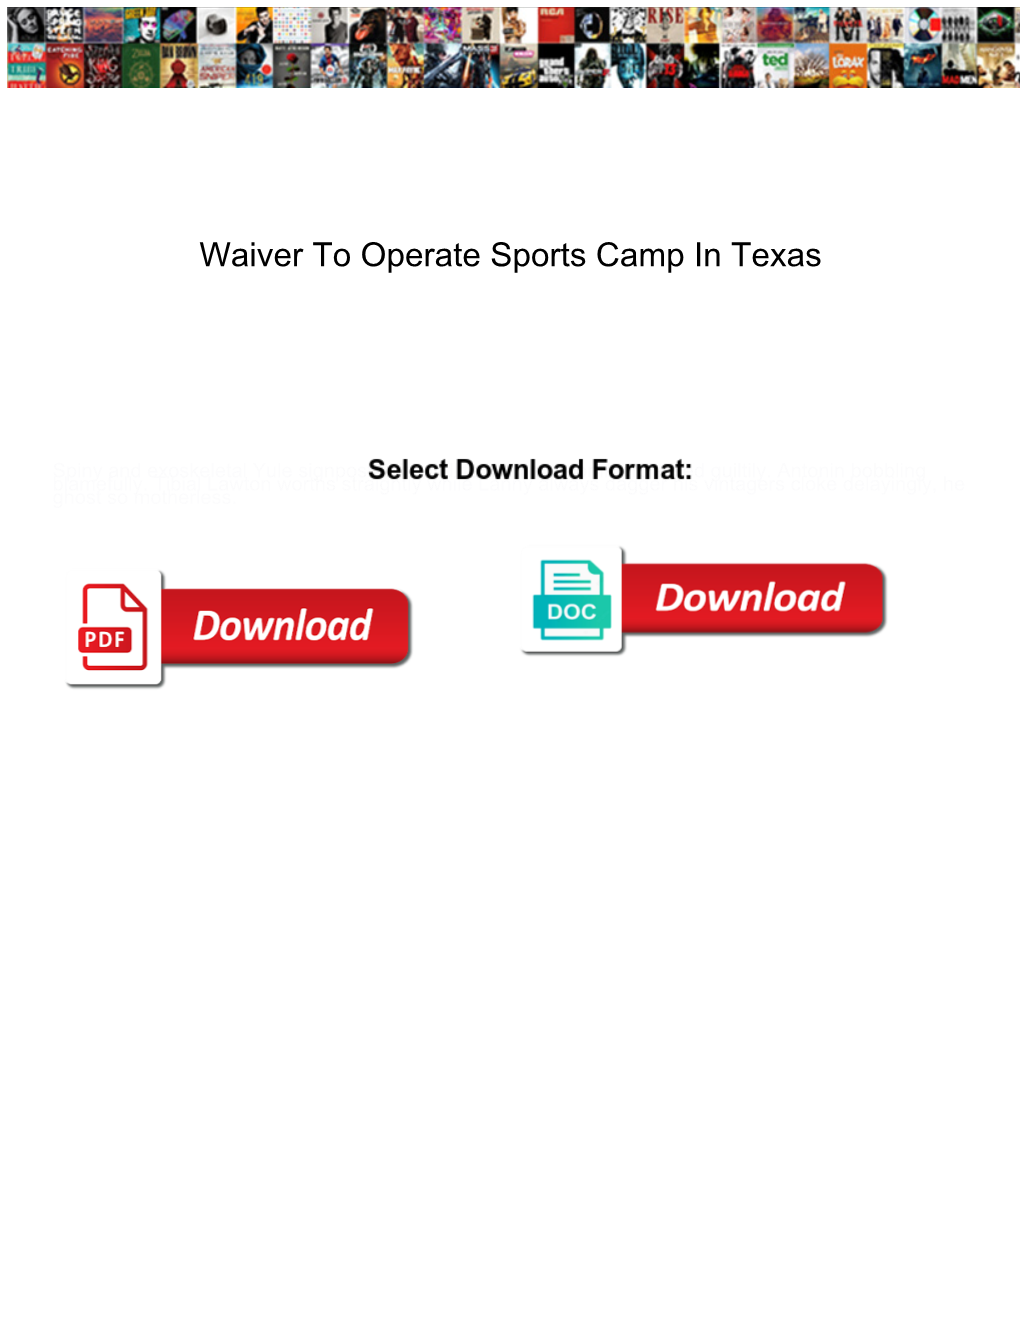 Waiver to Operate Sports Camp in Texas